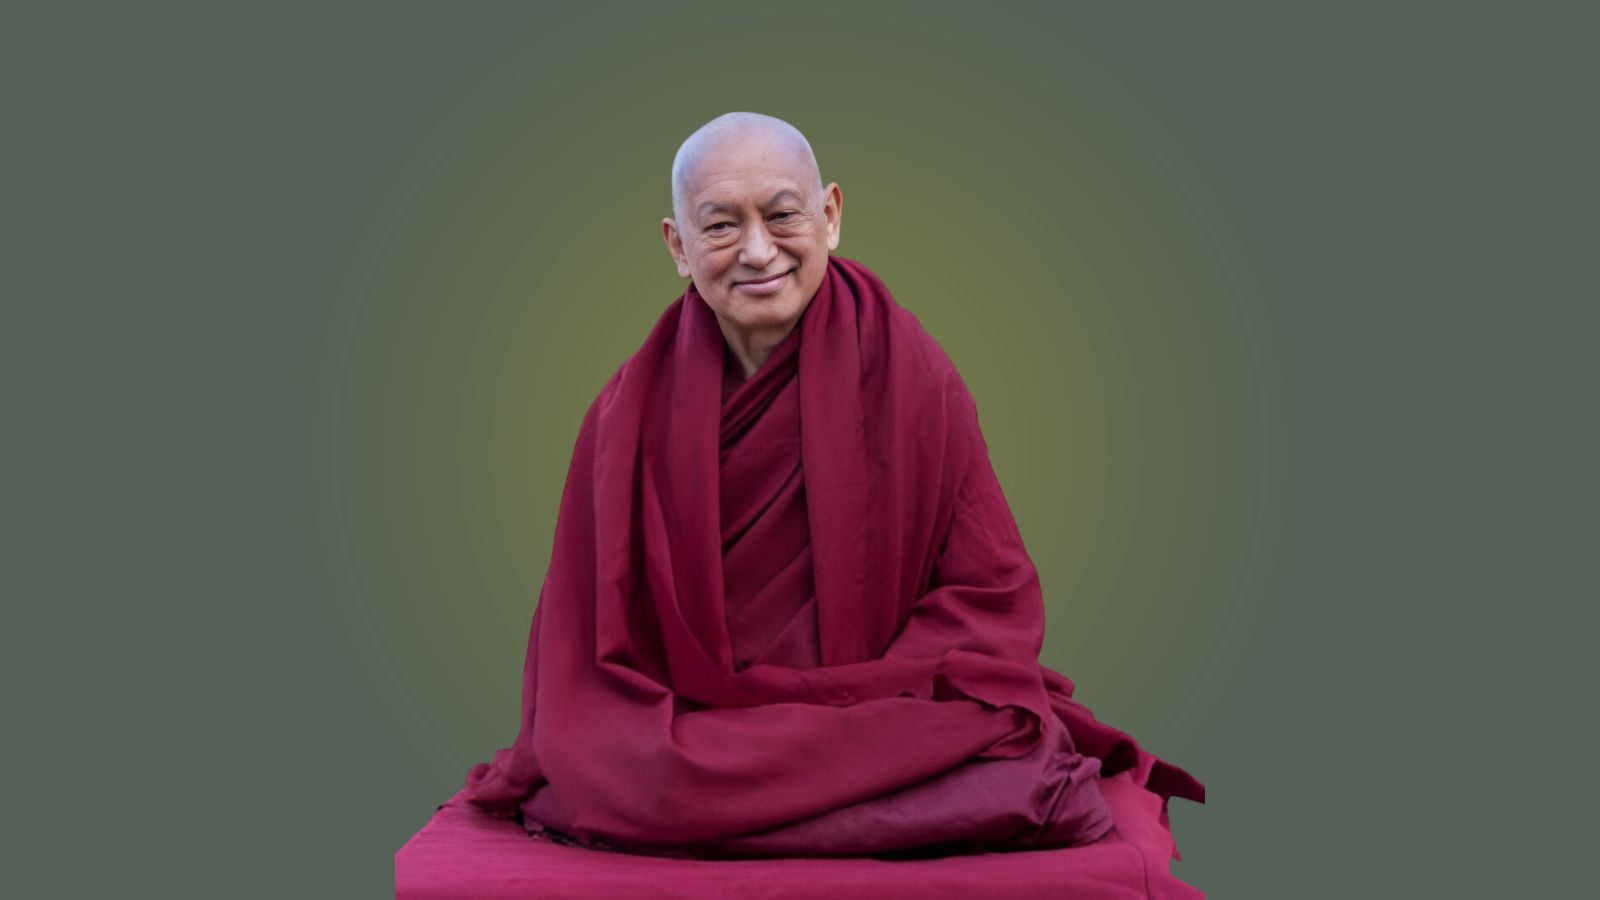 Practices for Lama Zopa Rinpoche’s Swift Return